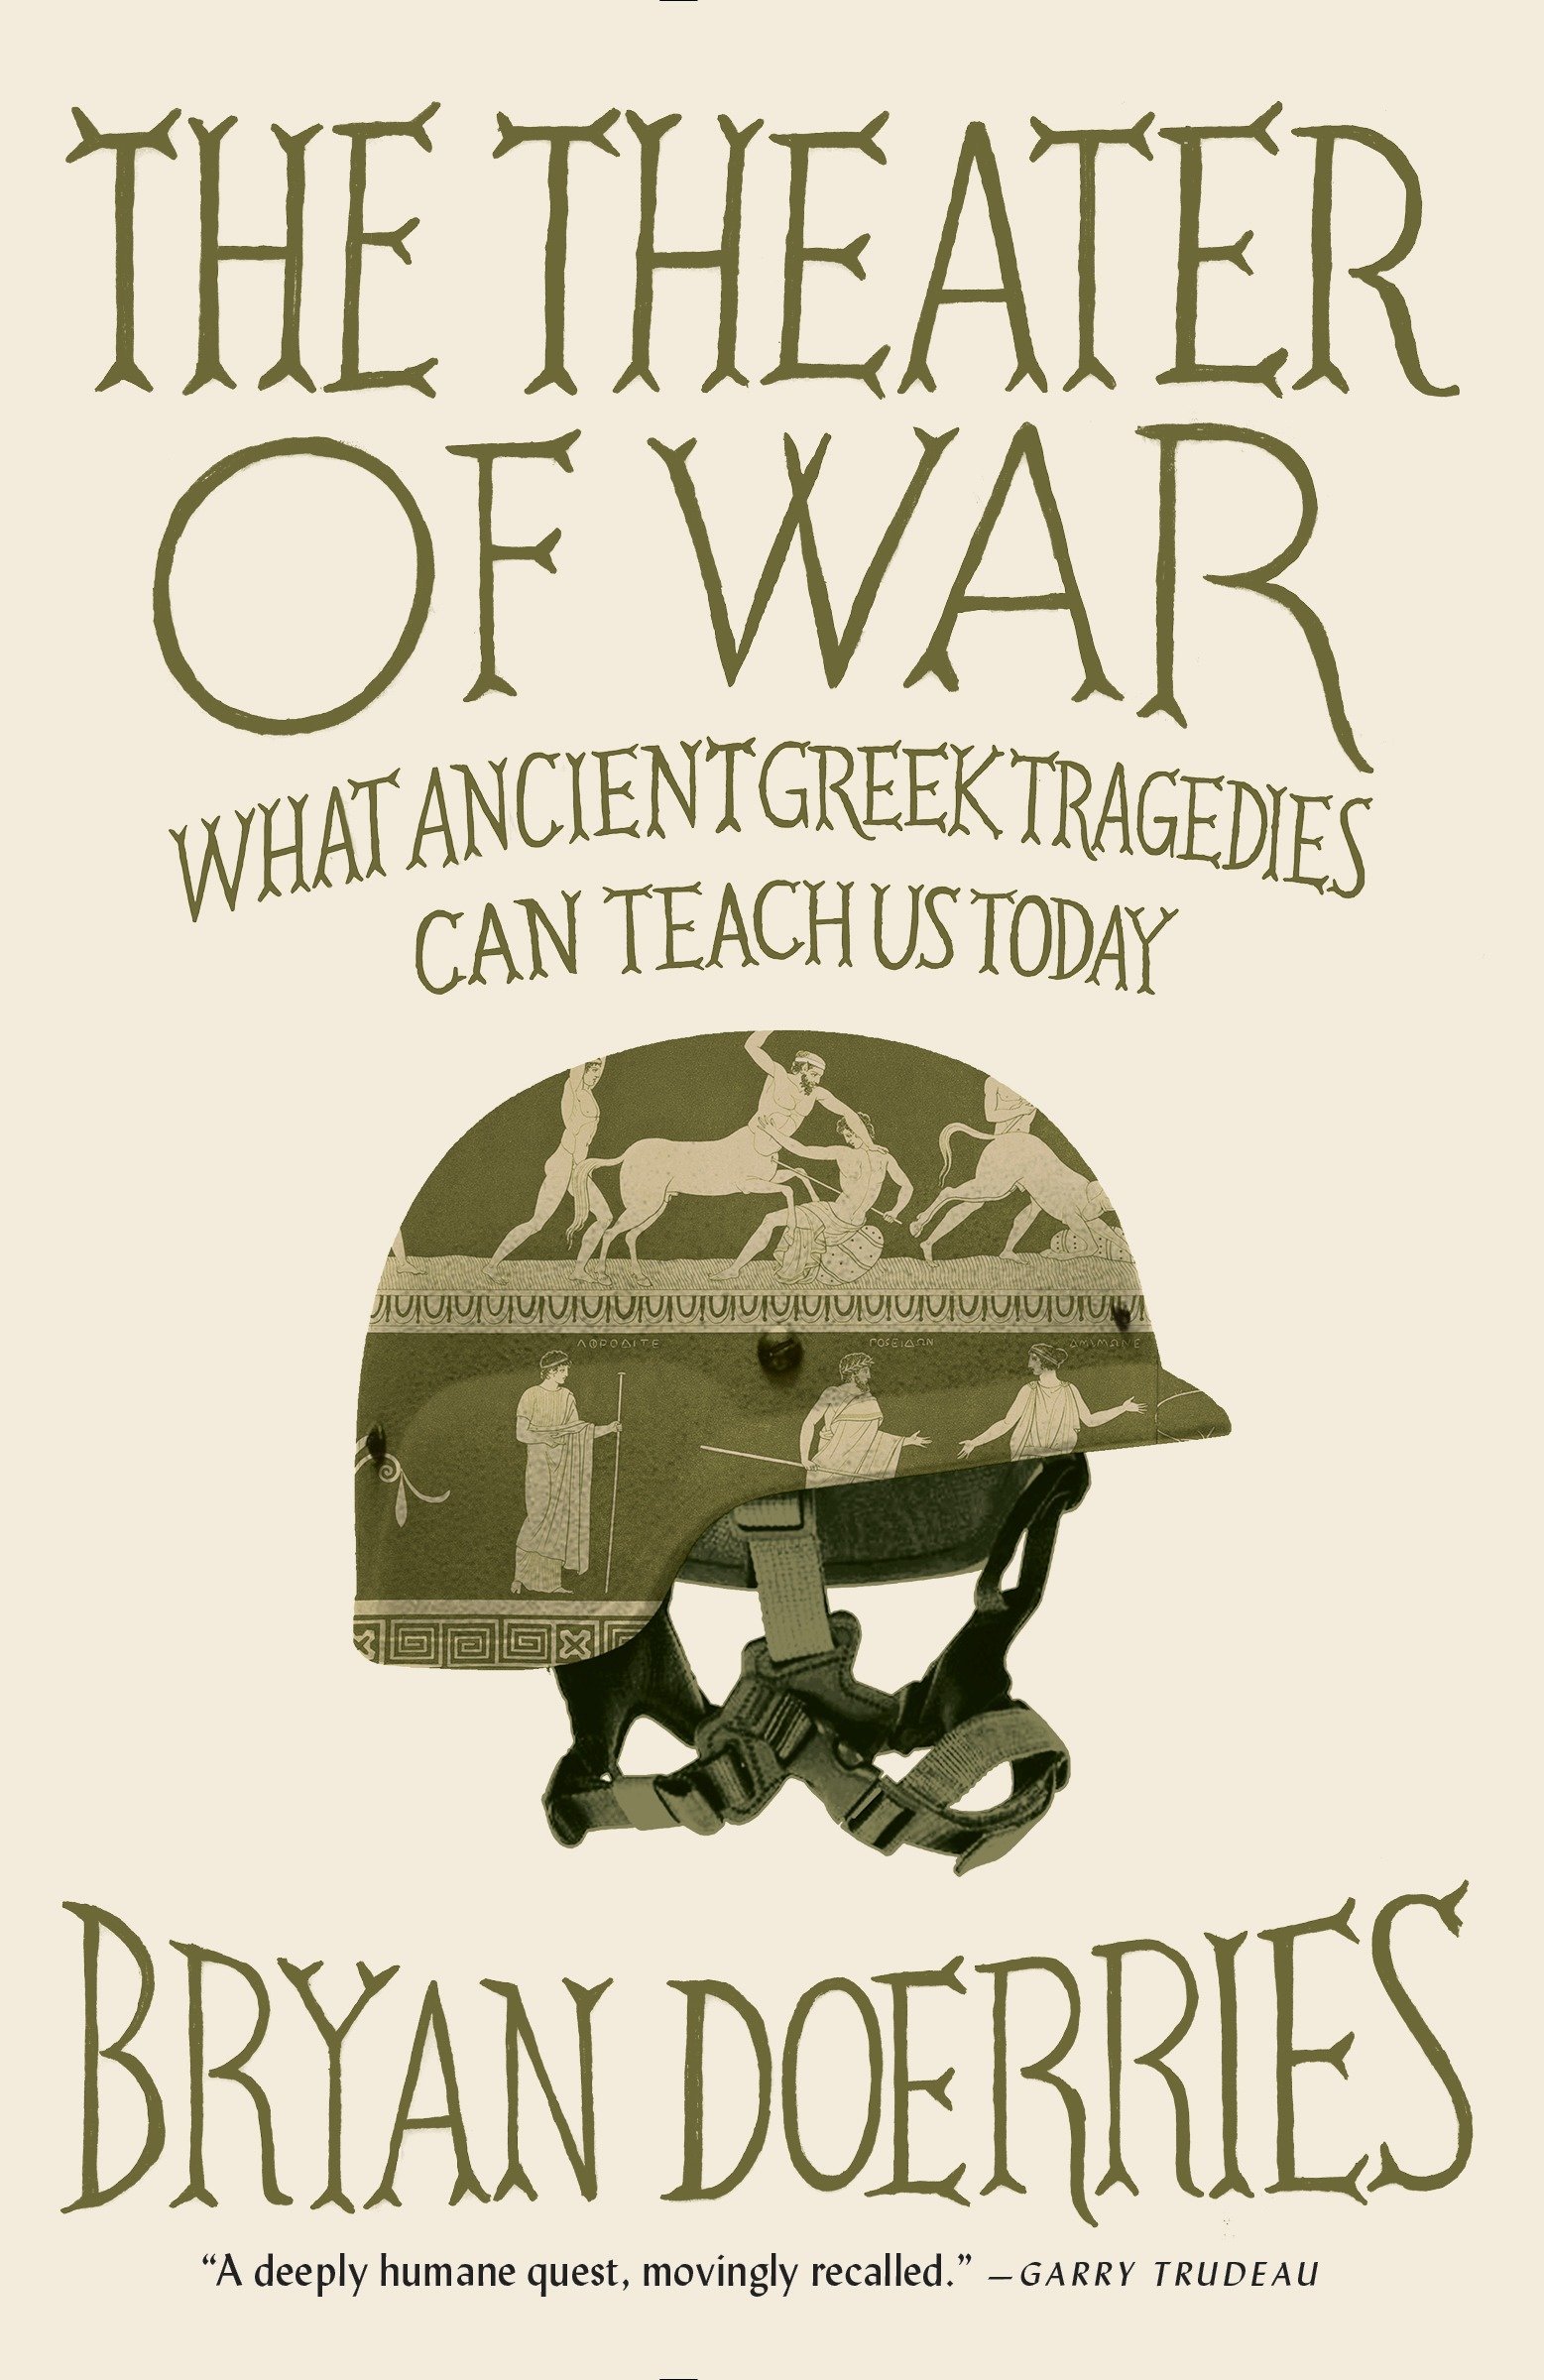 Bryan Doerries' The Theater of War: WHAT ANCIENT TRAGEDIES CAN TEACH US TODAY book cover